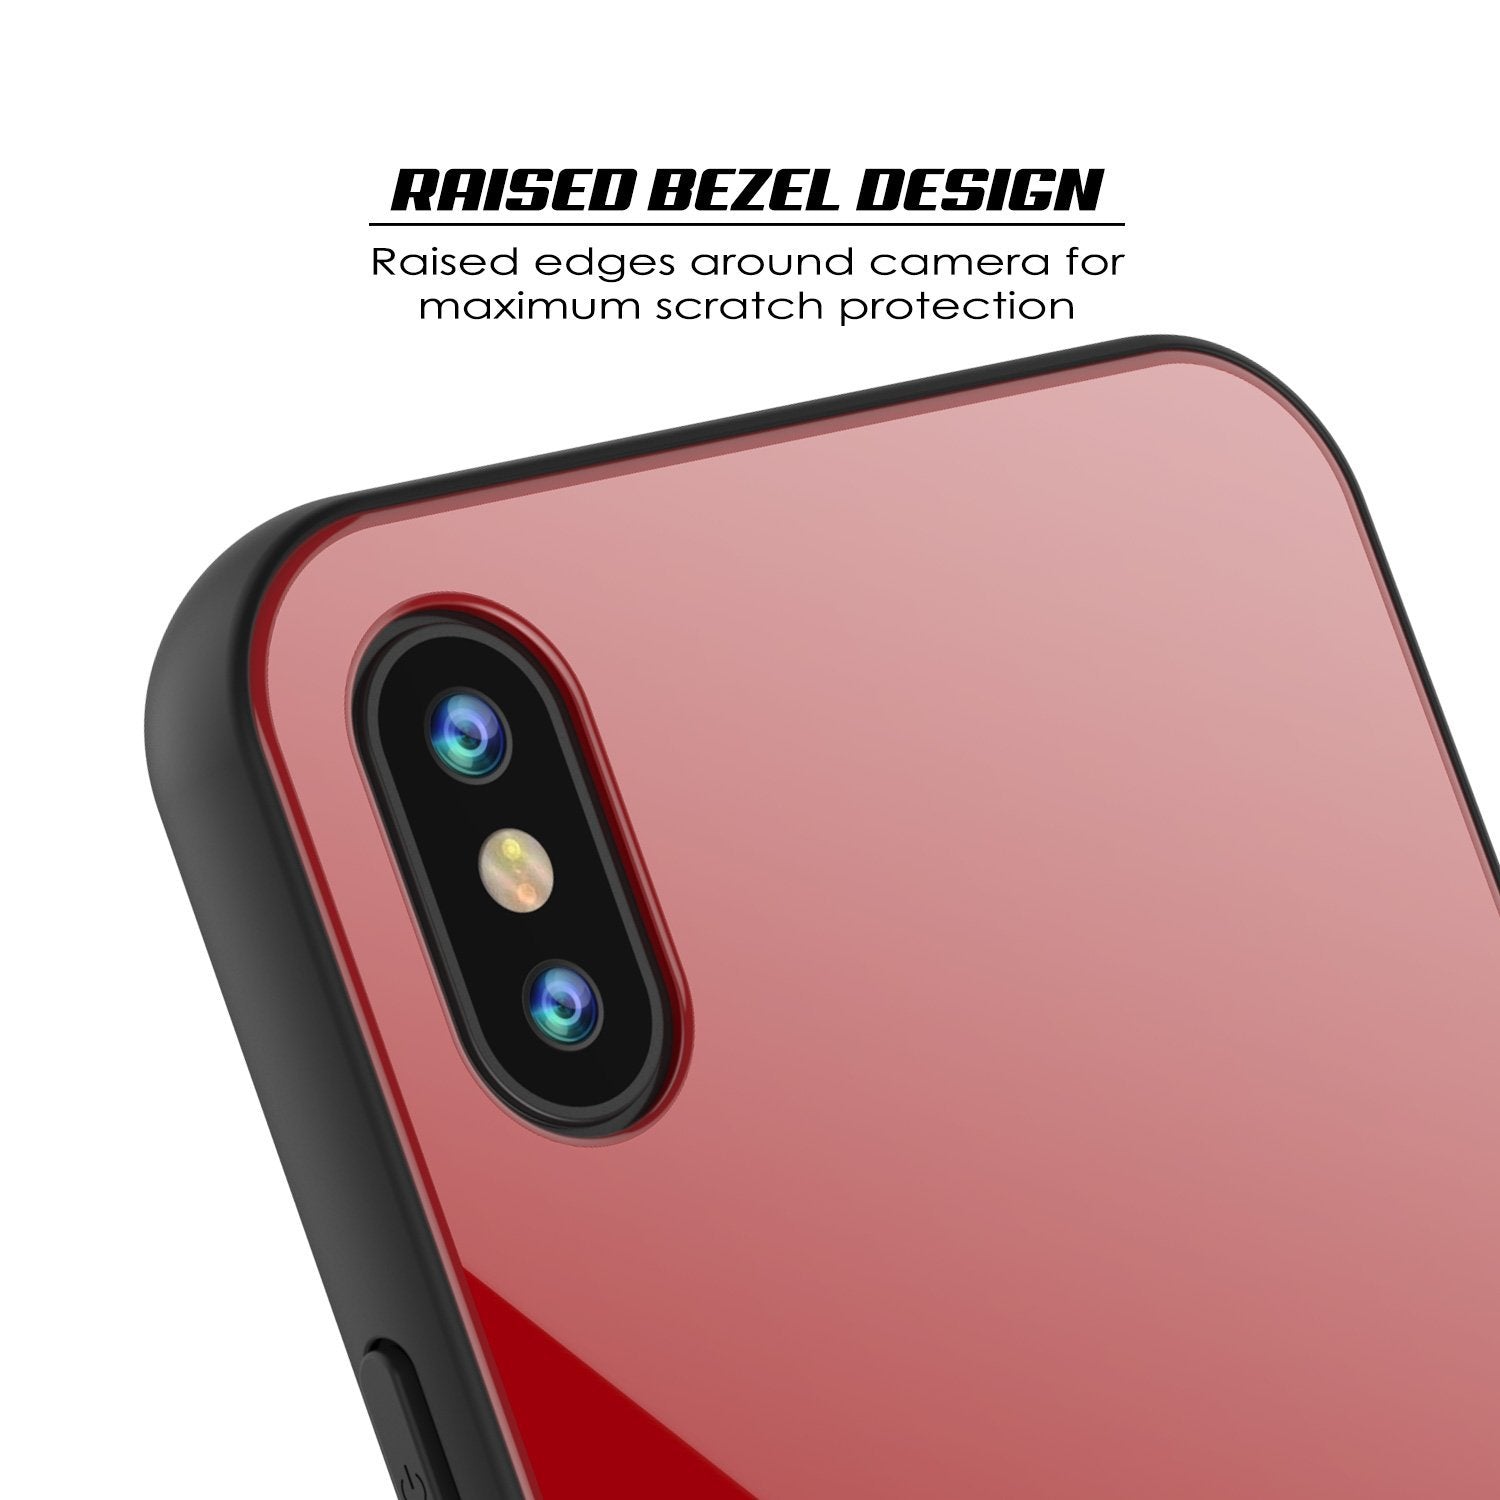 iPhone 8 Case, Punkcase GlassShield Ultra Thin Protective 9H Full Body Tempered Glass Cover W/ Drop Protection & Non Slip Grip for Apple iPhone 7 / Apple iPhone 8 (Red)